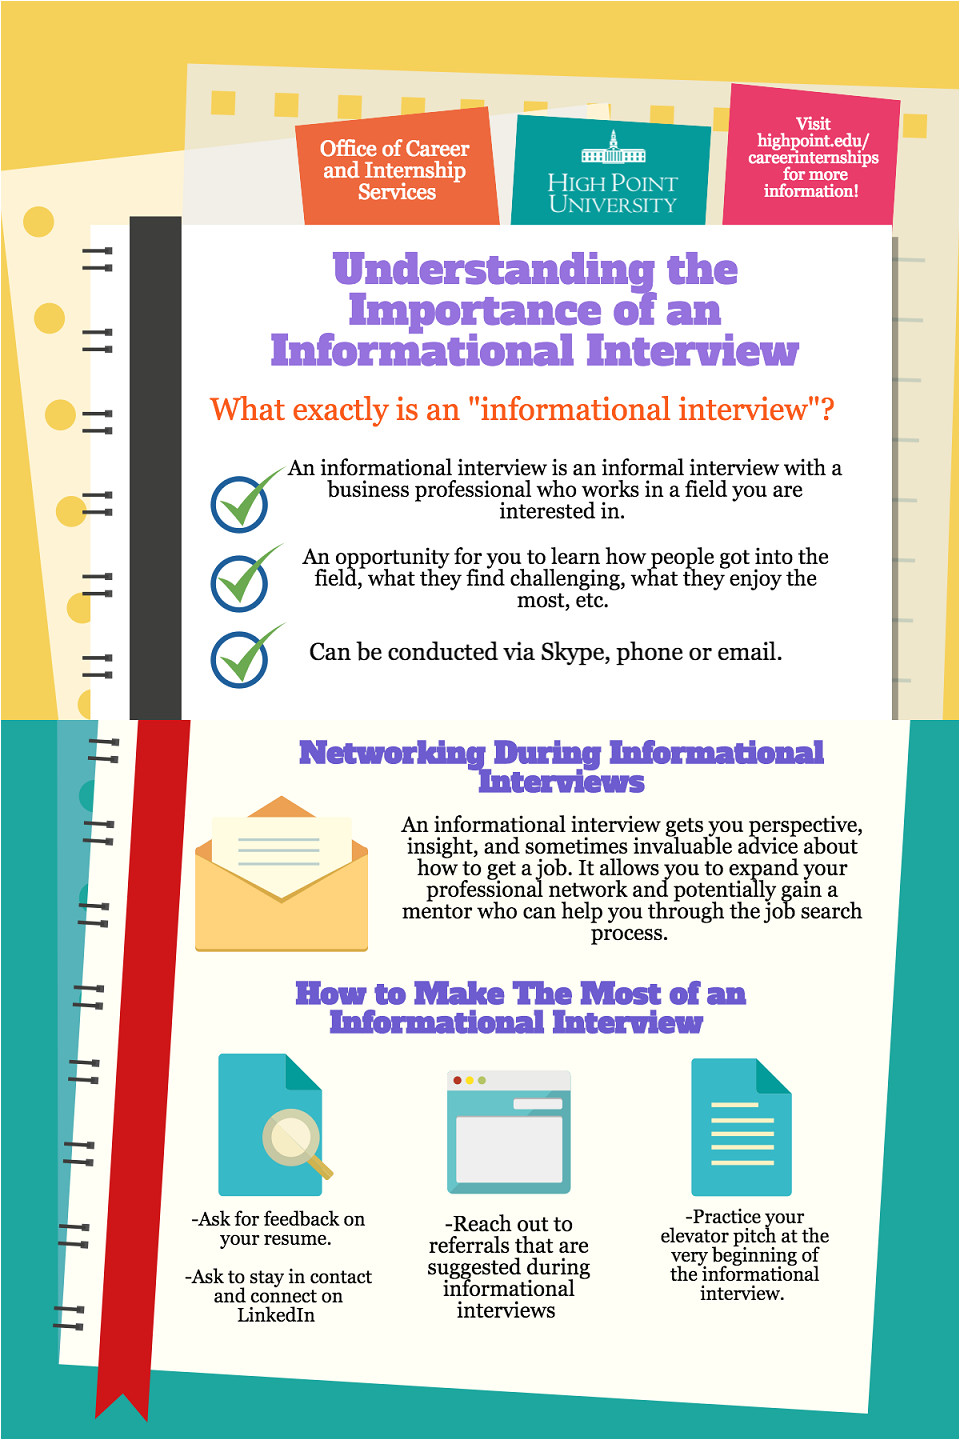 informational interviews infographic